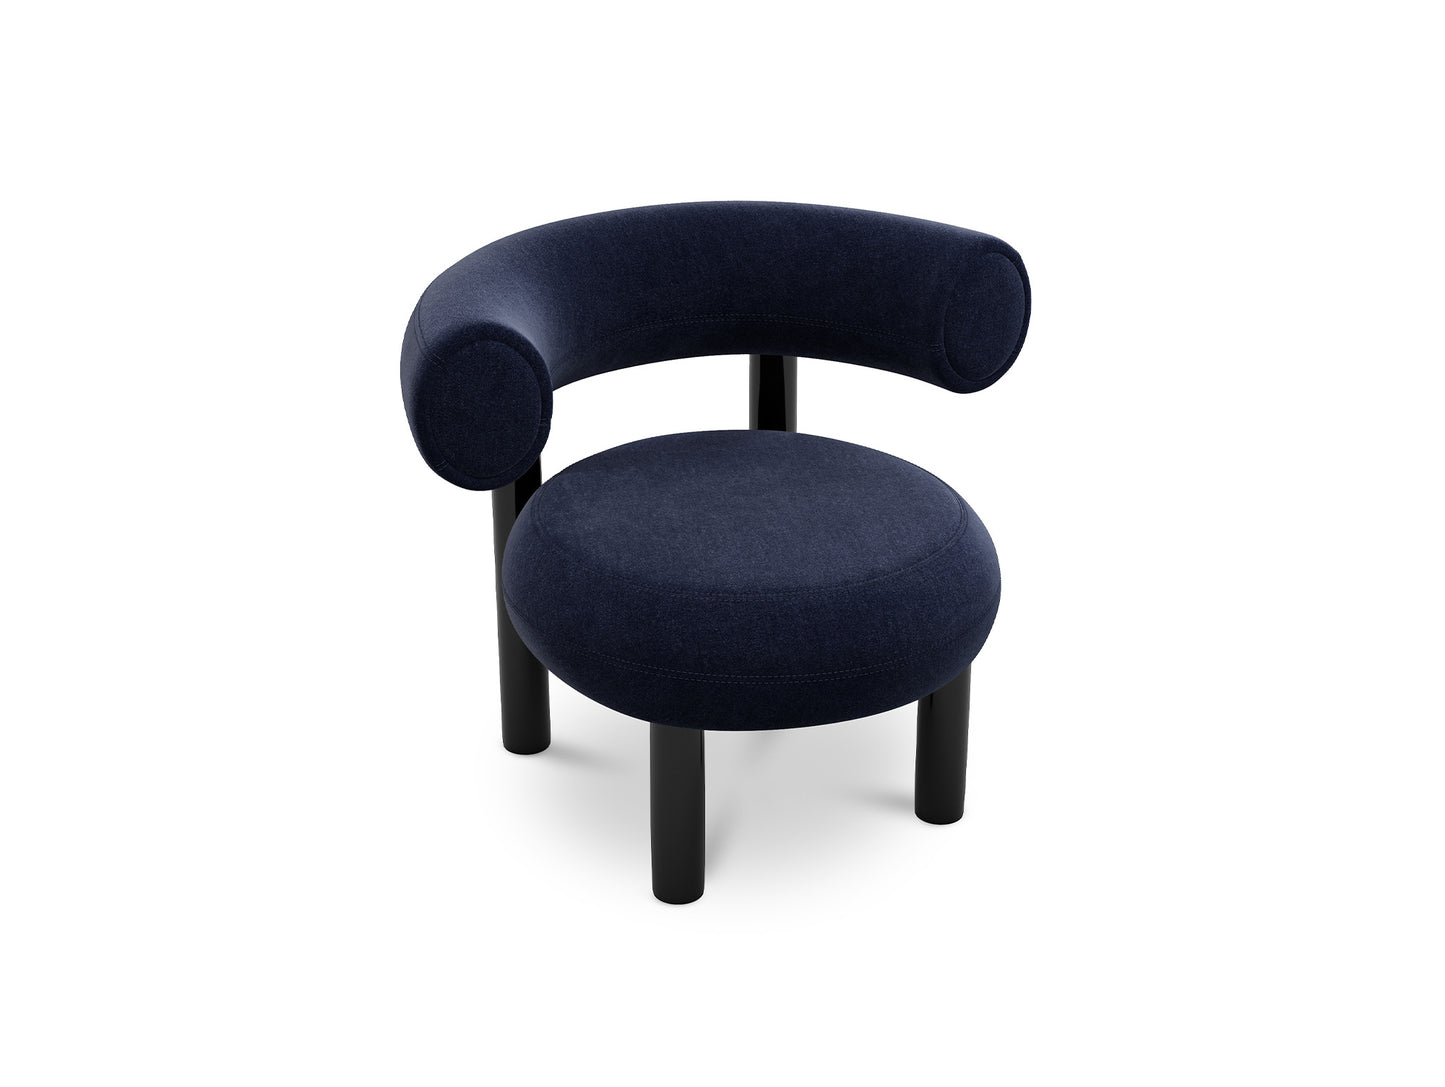 Fat Lounge Chair by Tom Dixon - Gentle 2 783